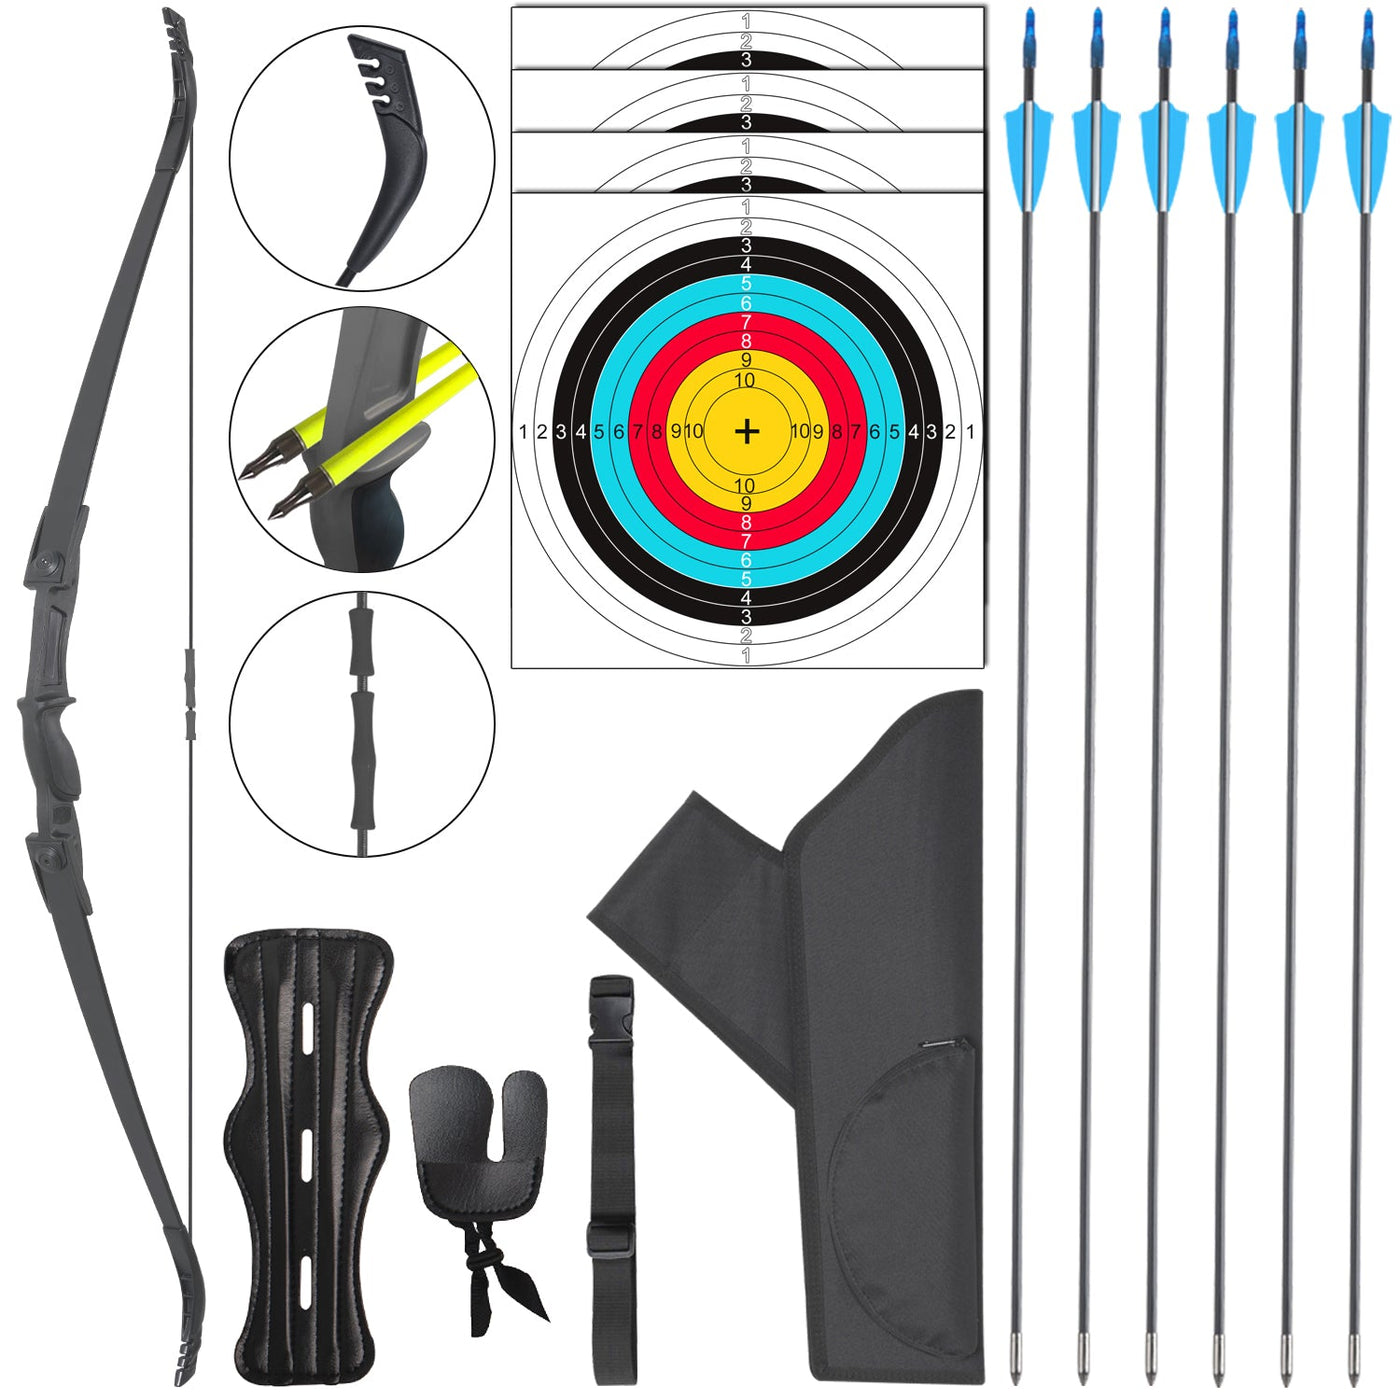 F117 54" Orange Youth Bow Set Takedown Bow Beginner Bow&Arrow 25-35 Lbs, For 12+